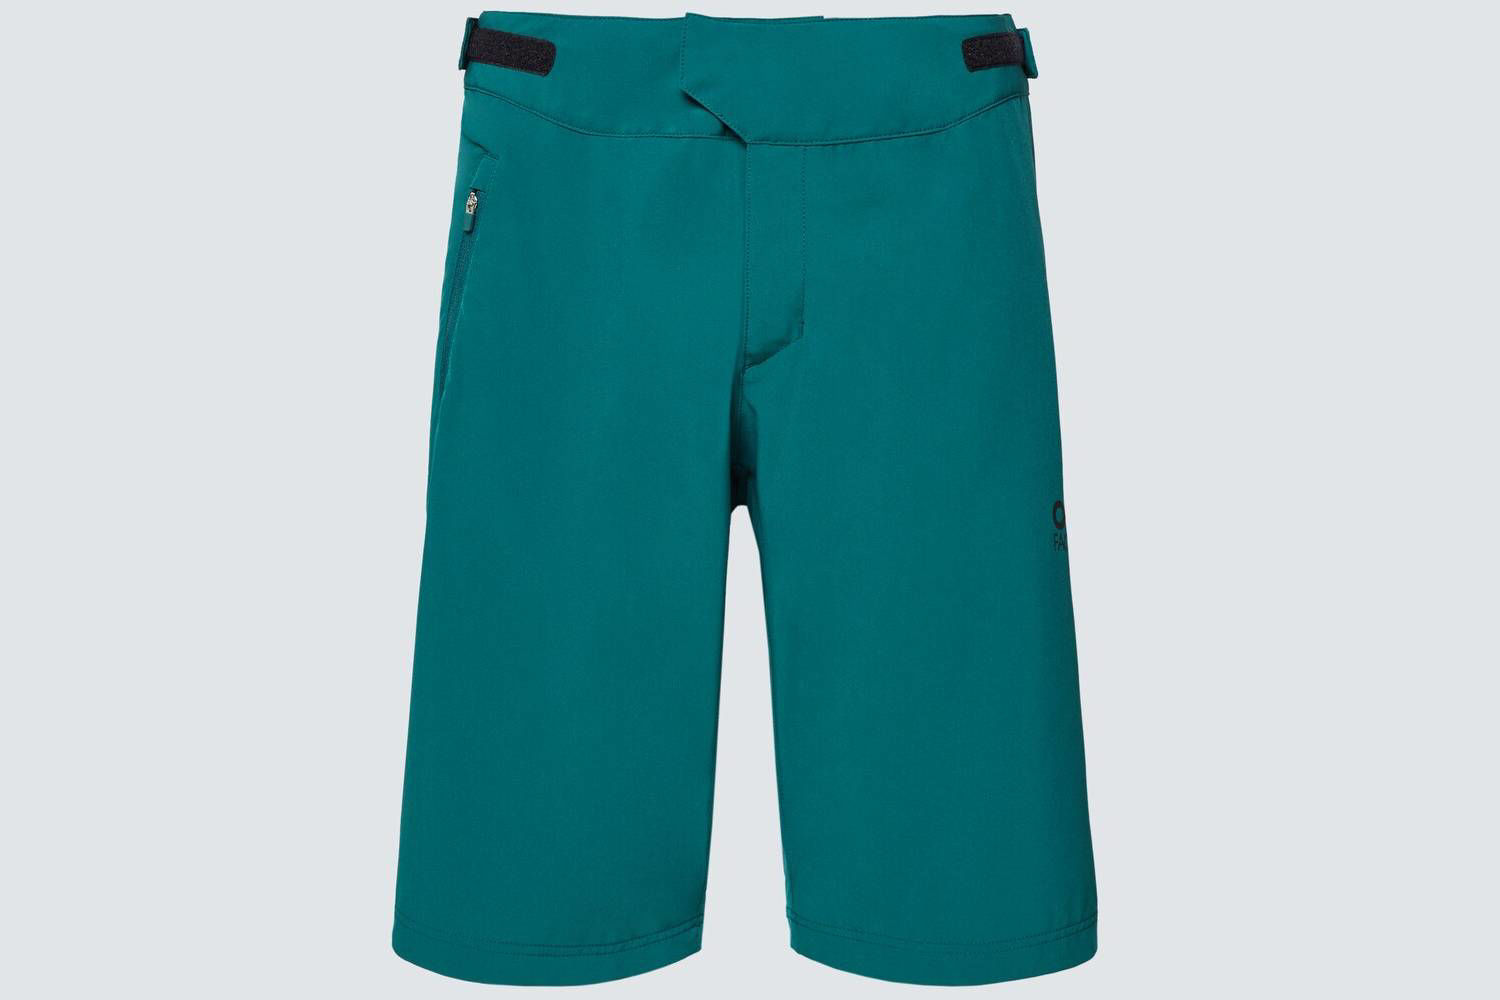 Picture of OAKLEY BayBarry Factory Pilot Lite Shorts